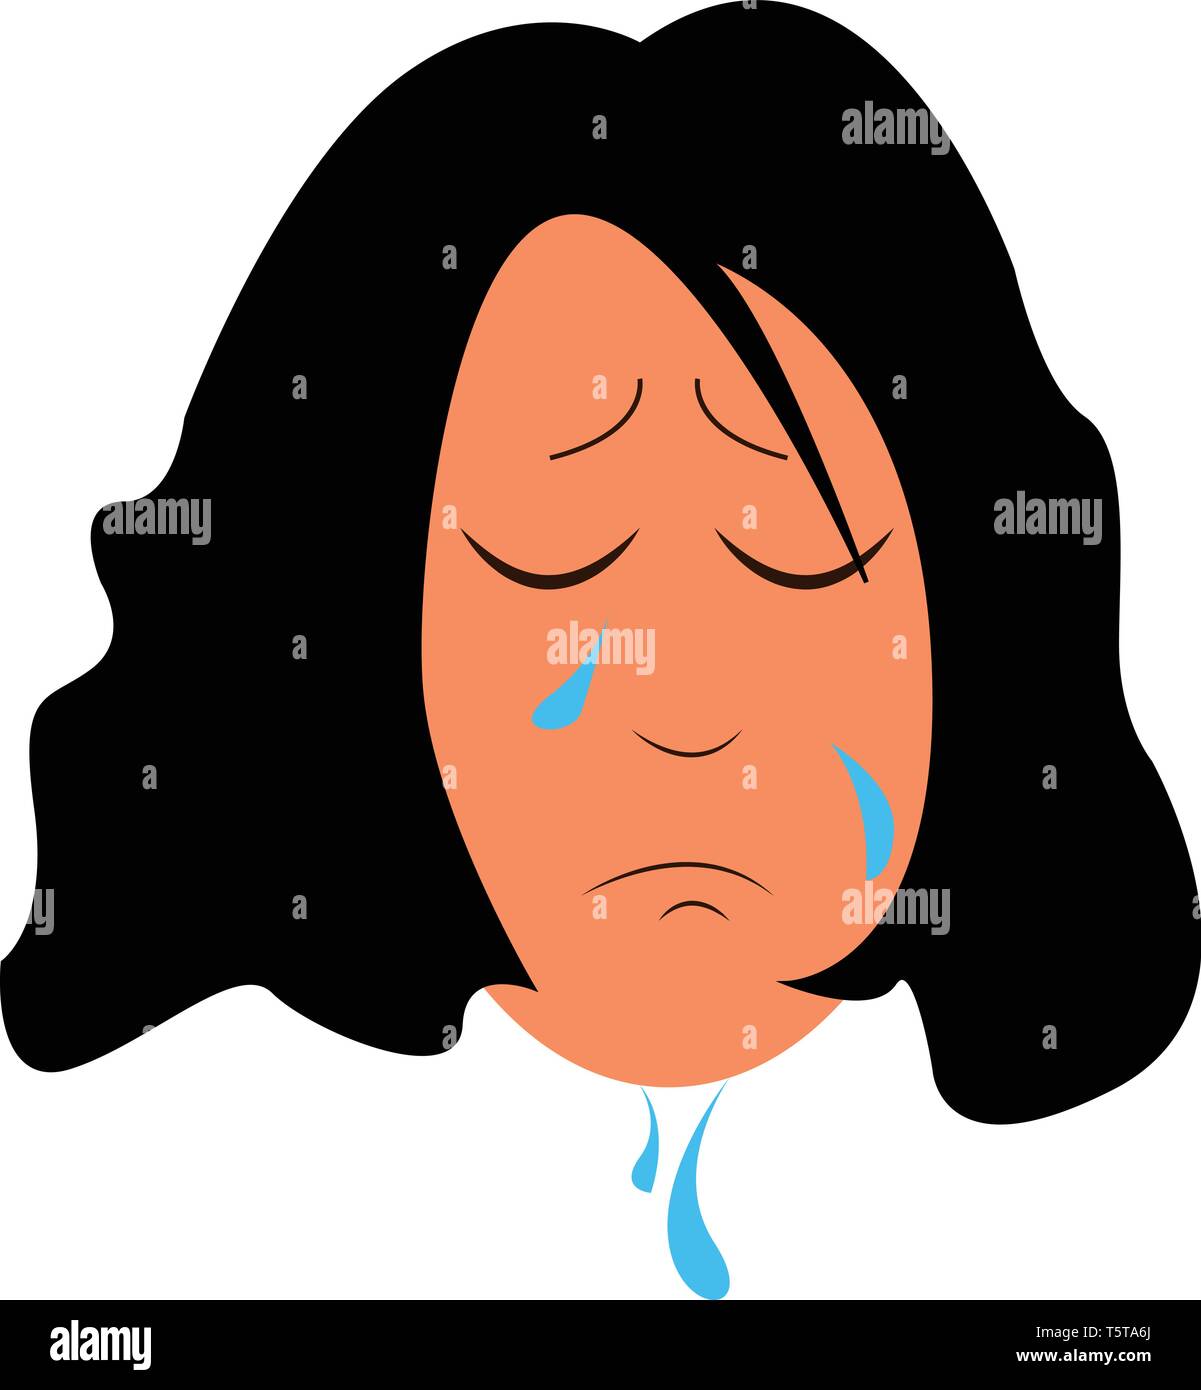 A drawing of a girl who is sad and has tears falling down her face implying that she is crying vector color drawing or illustration Stock Vector